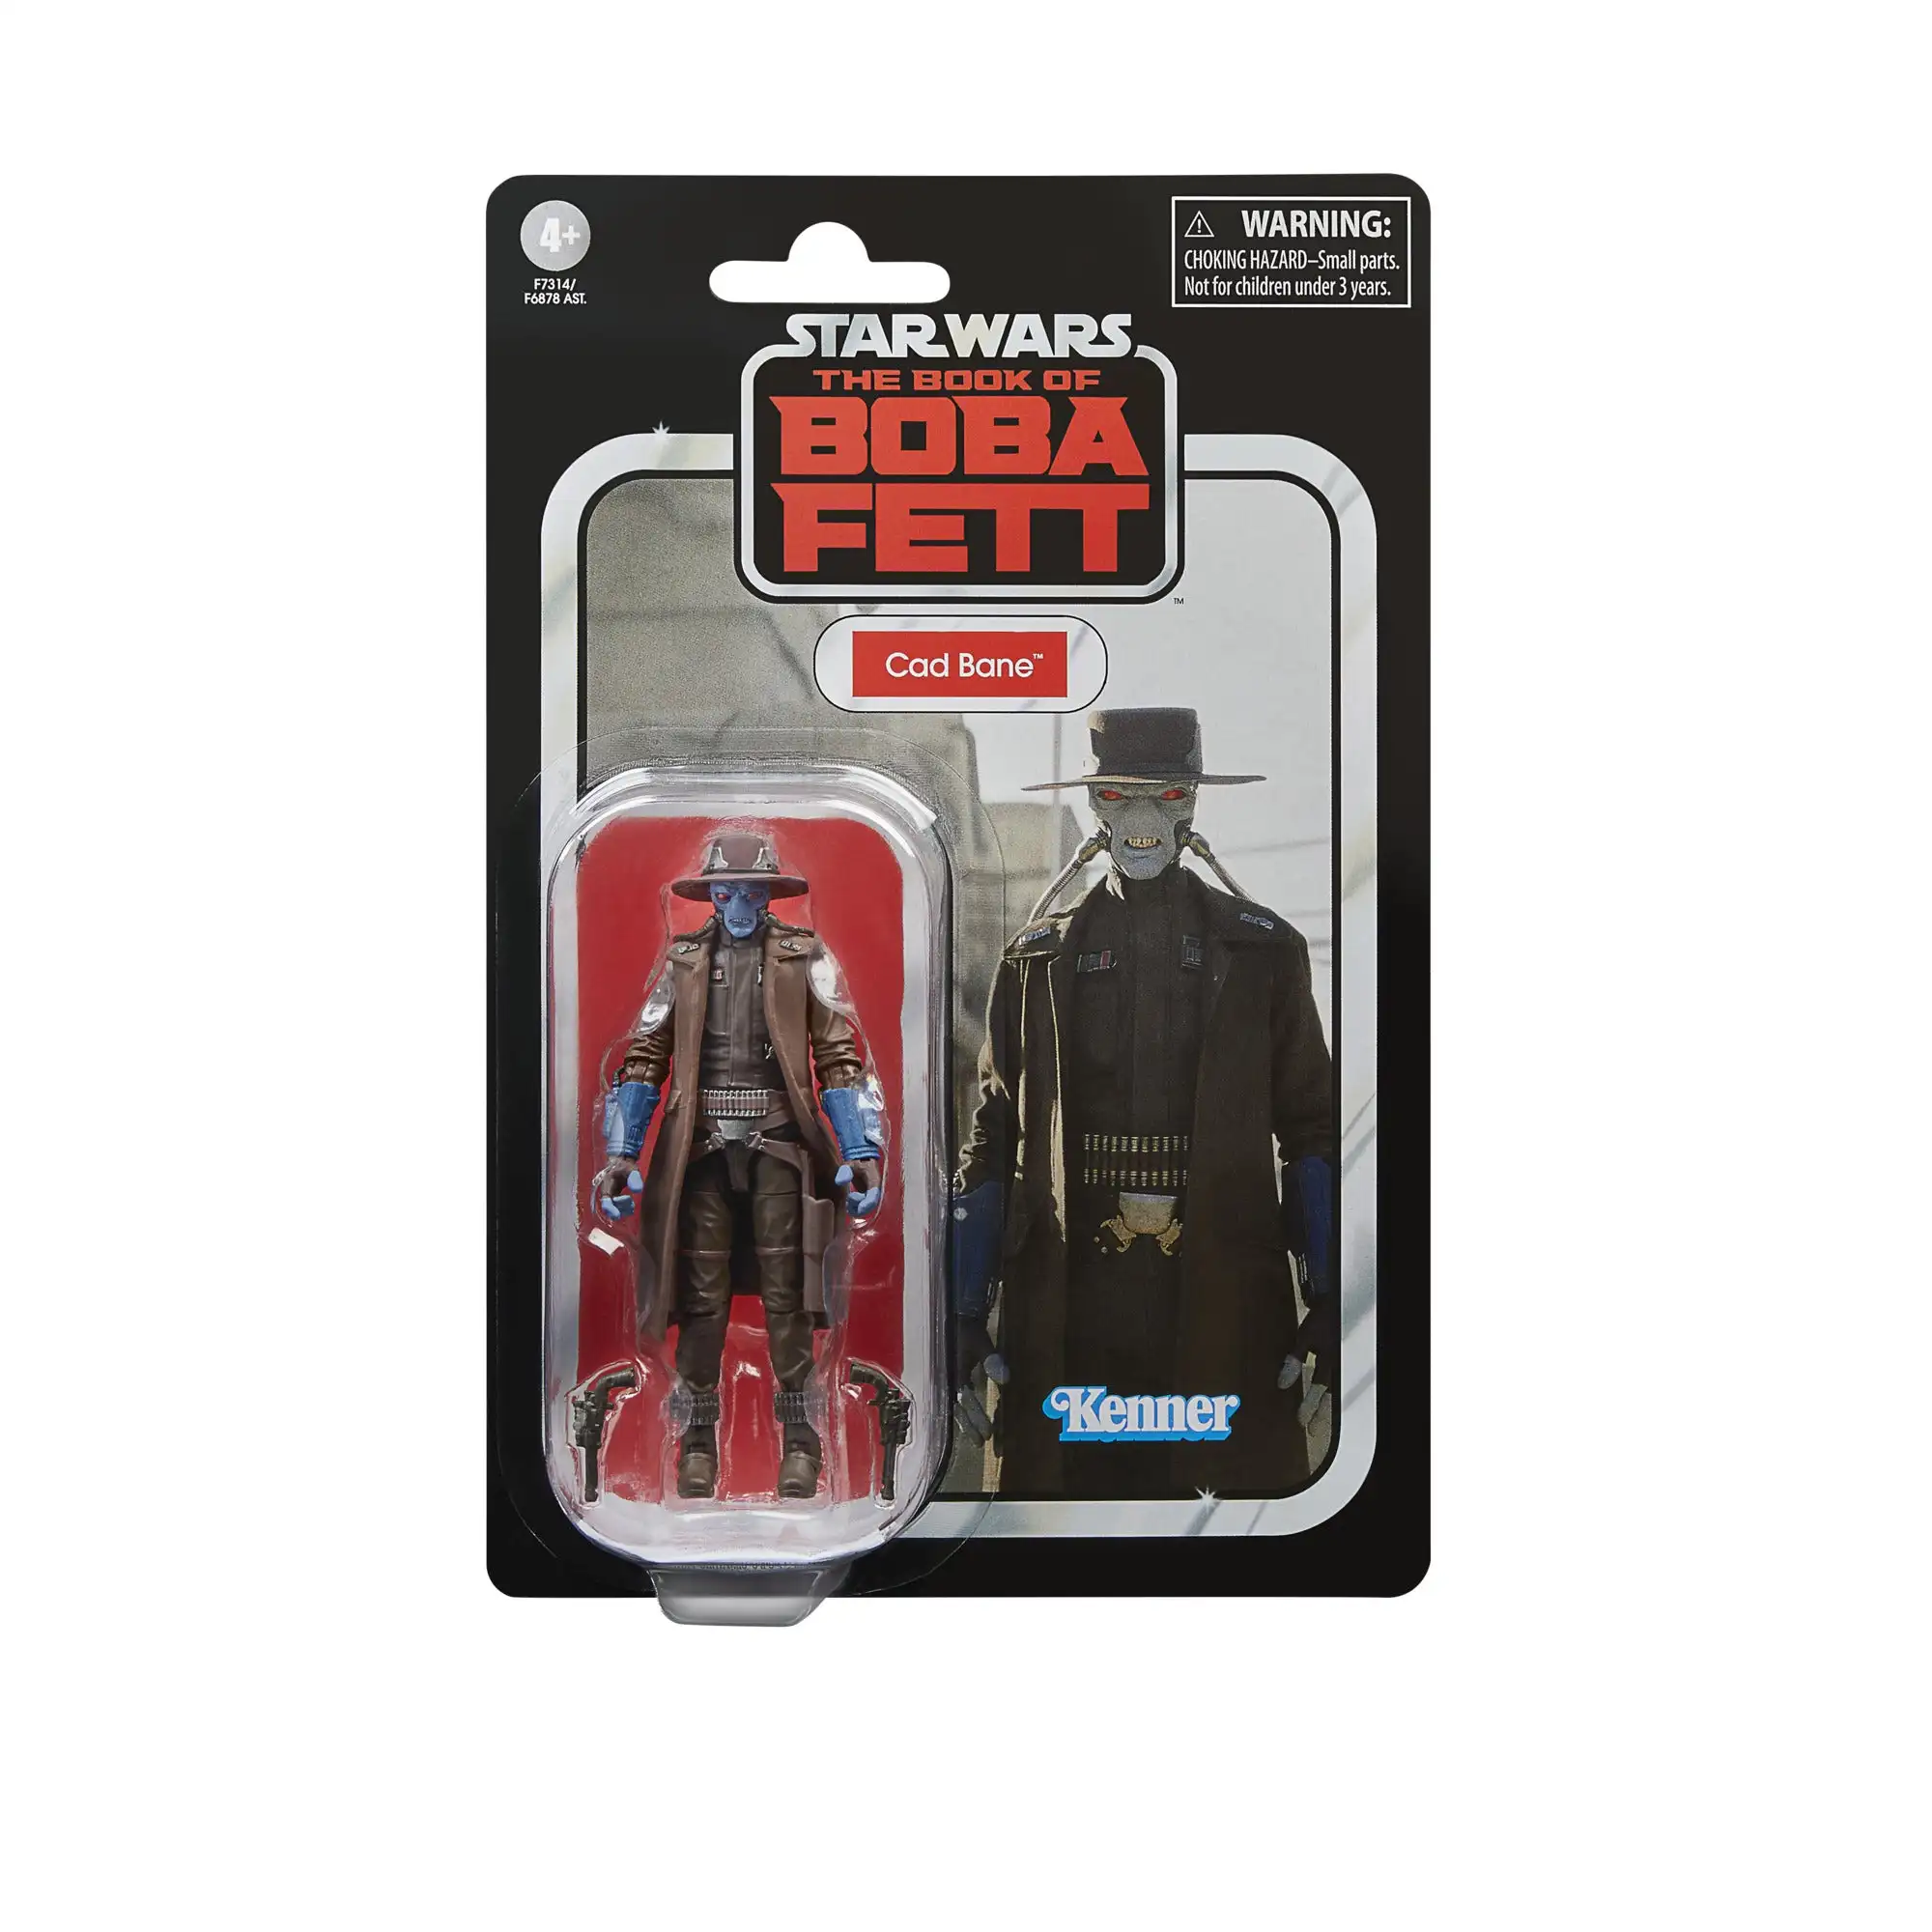 

In Stock Original Hasbro Star Wars: The Vintage Collection Cad Bane (Book of Boba Fett) 3.75 Inch Action Figure